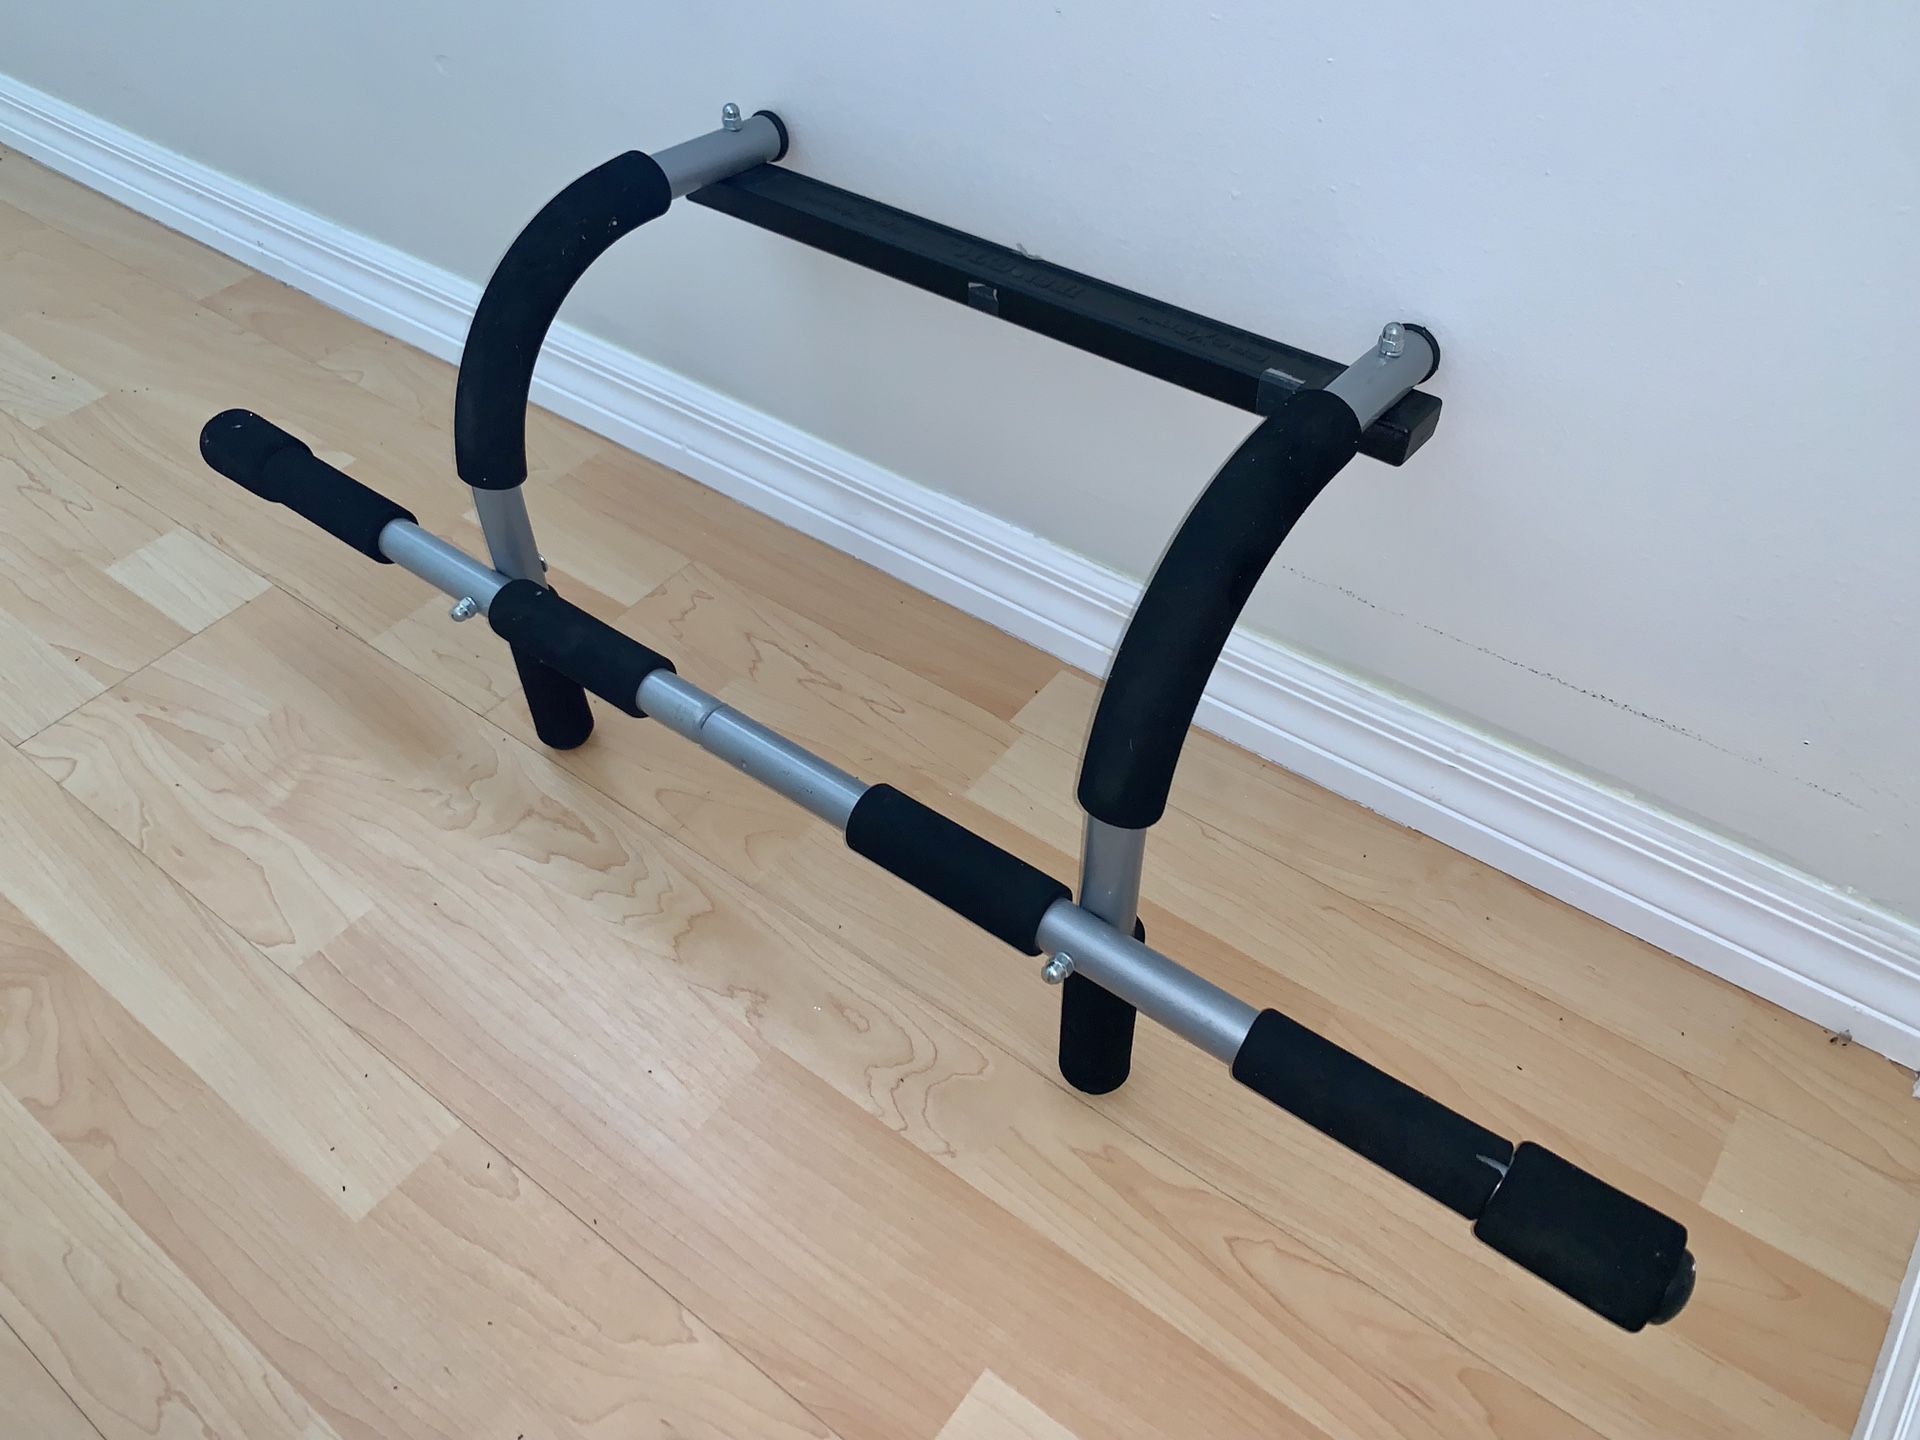 Workout Bar - Iron Gym® $30 Value GREAT CONDITION